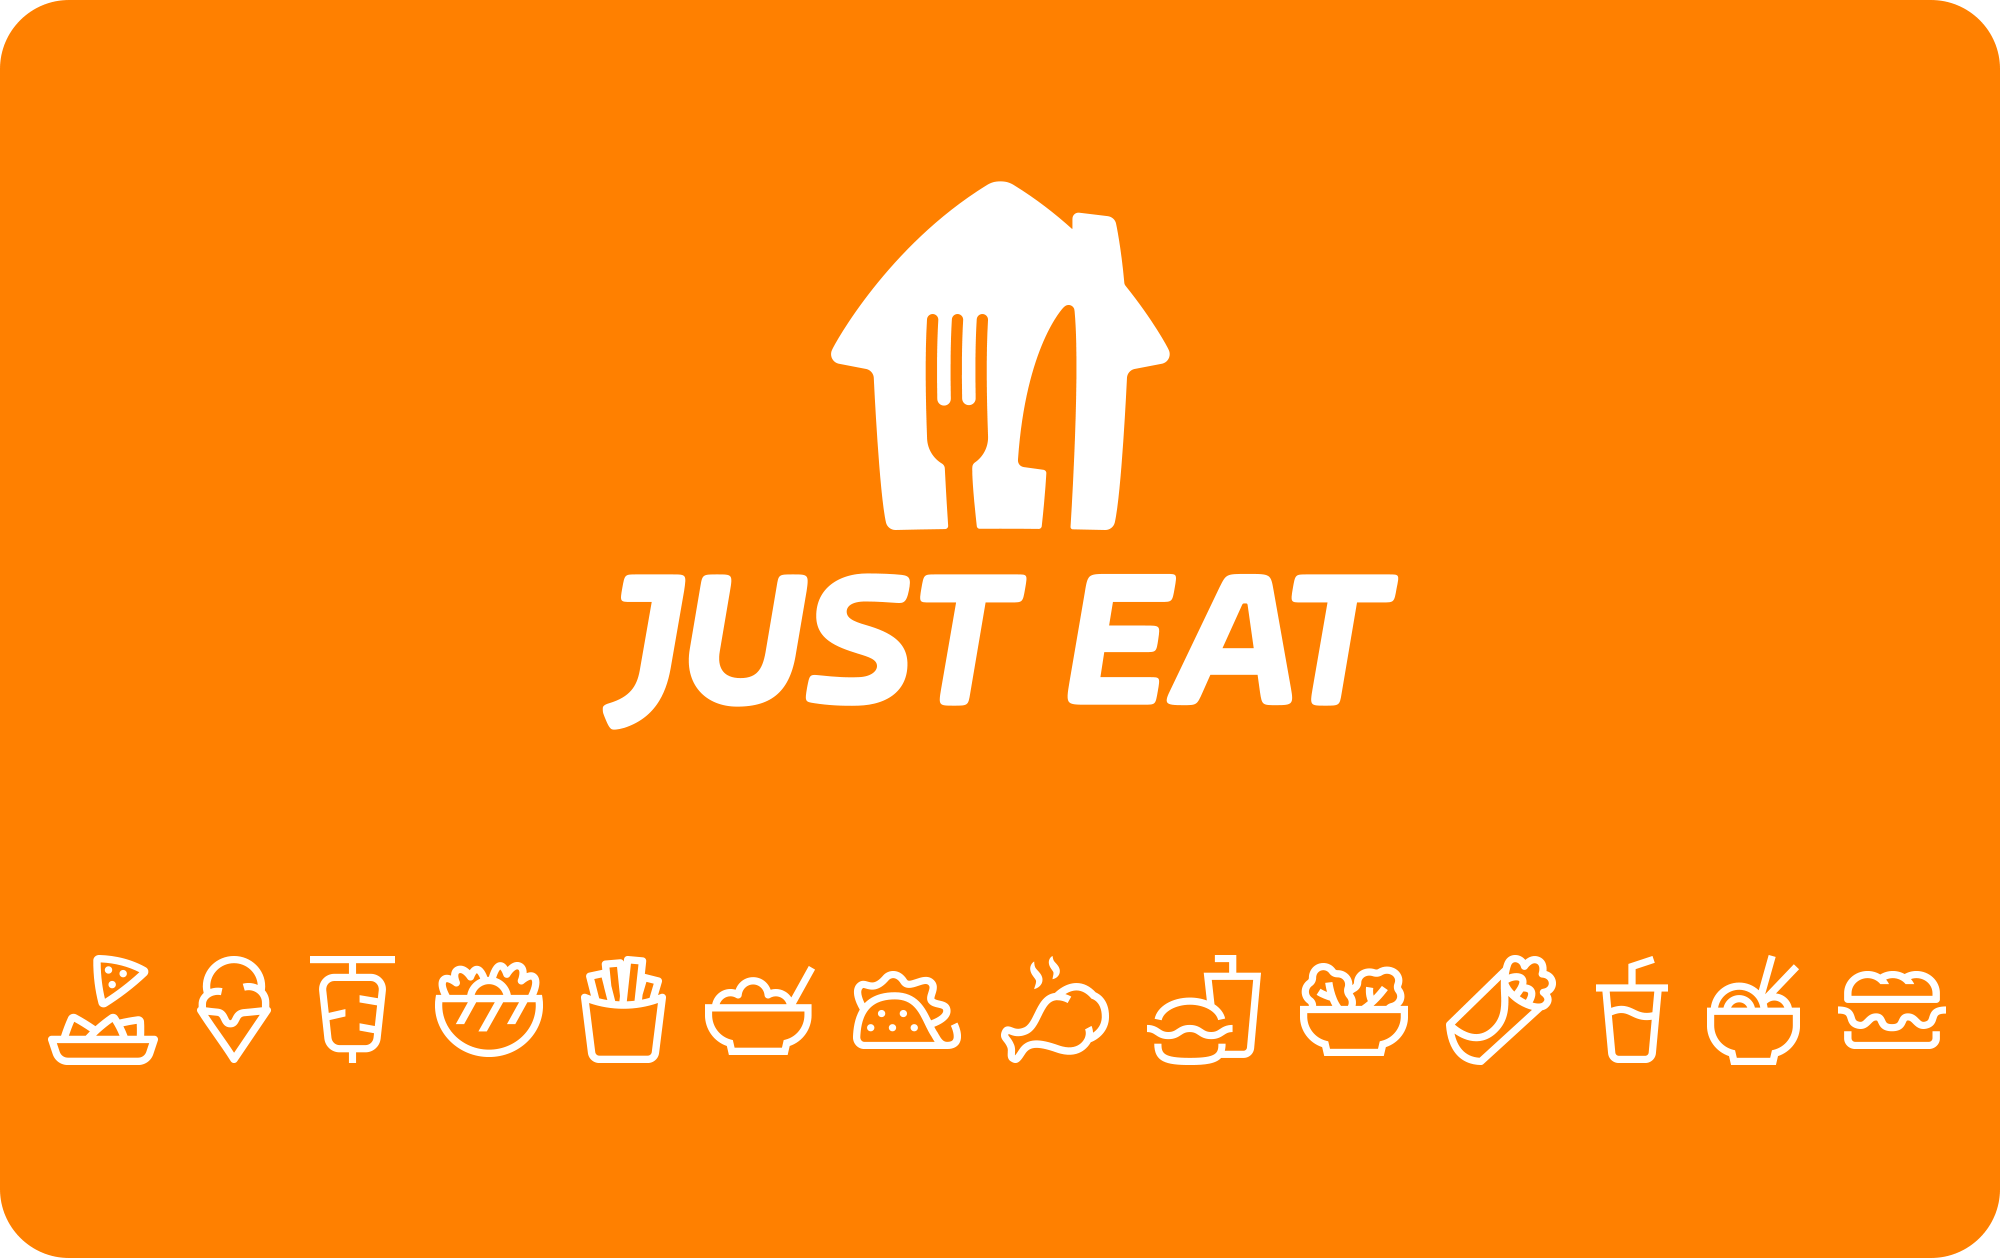 Just Eat £50 Gift Card UK